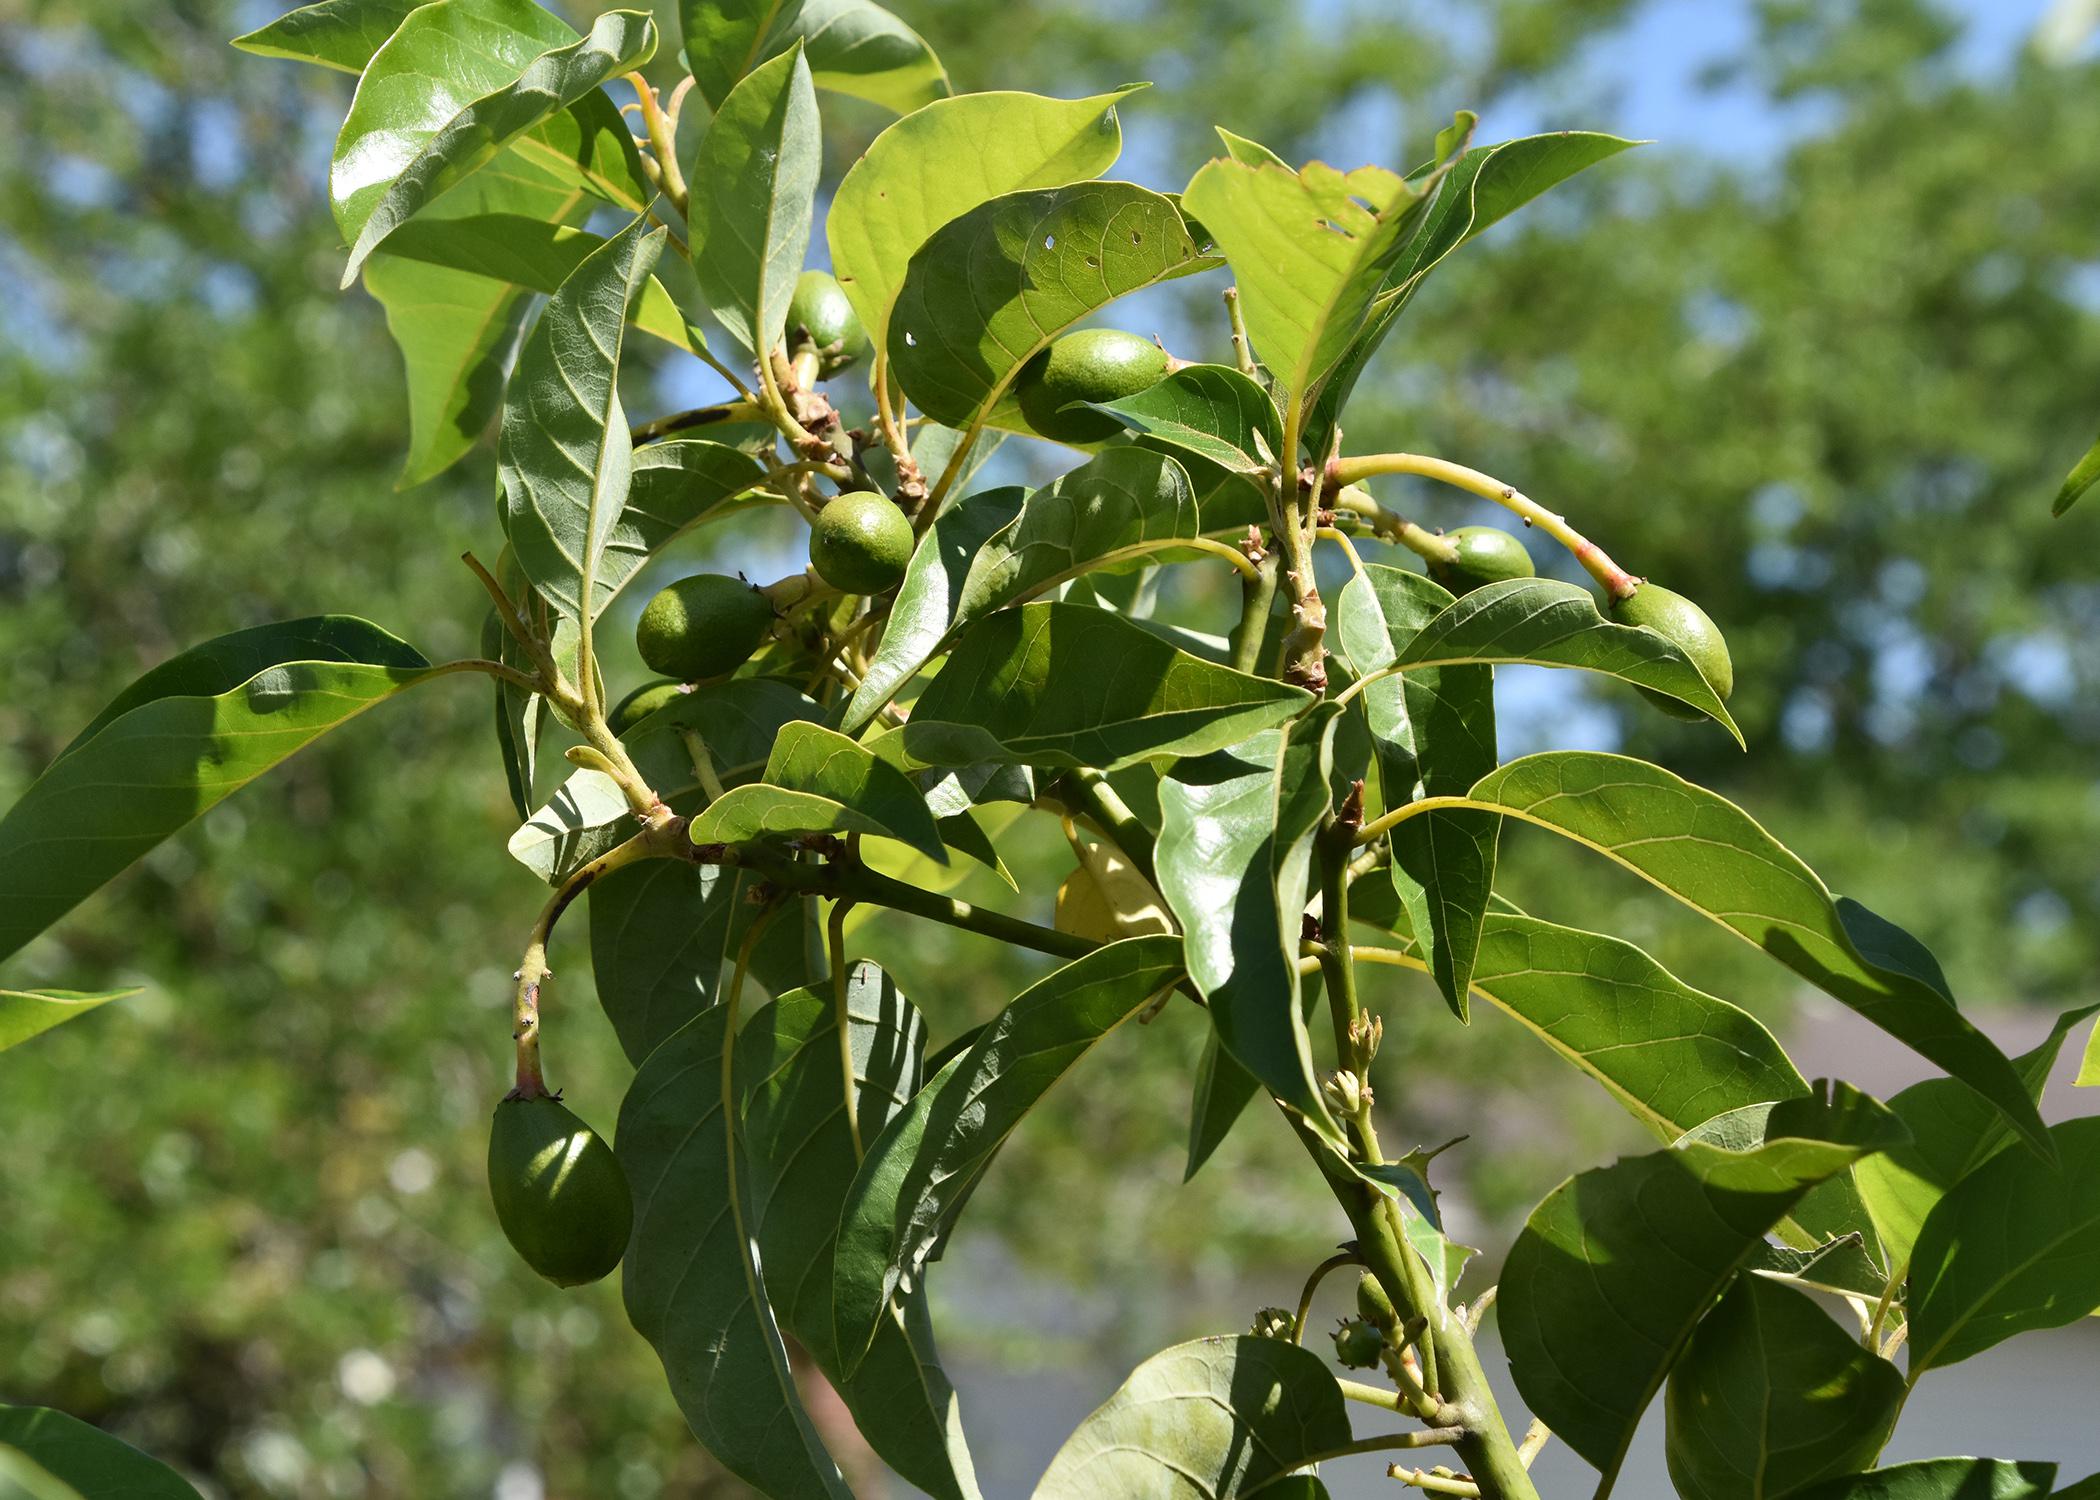 A small branch with green leaves has several small, green avacados growing from it.